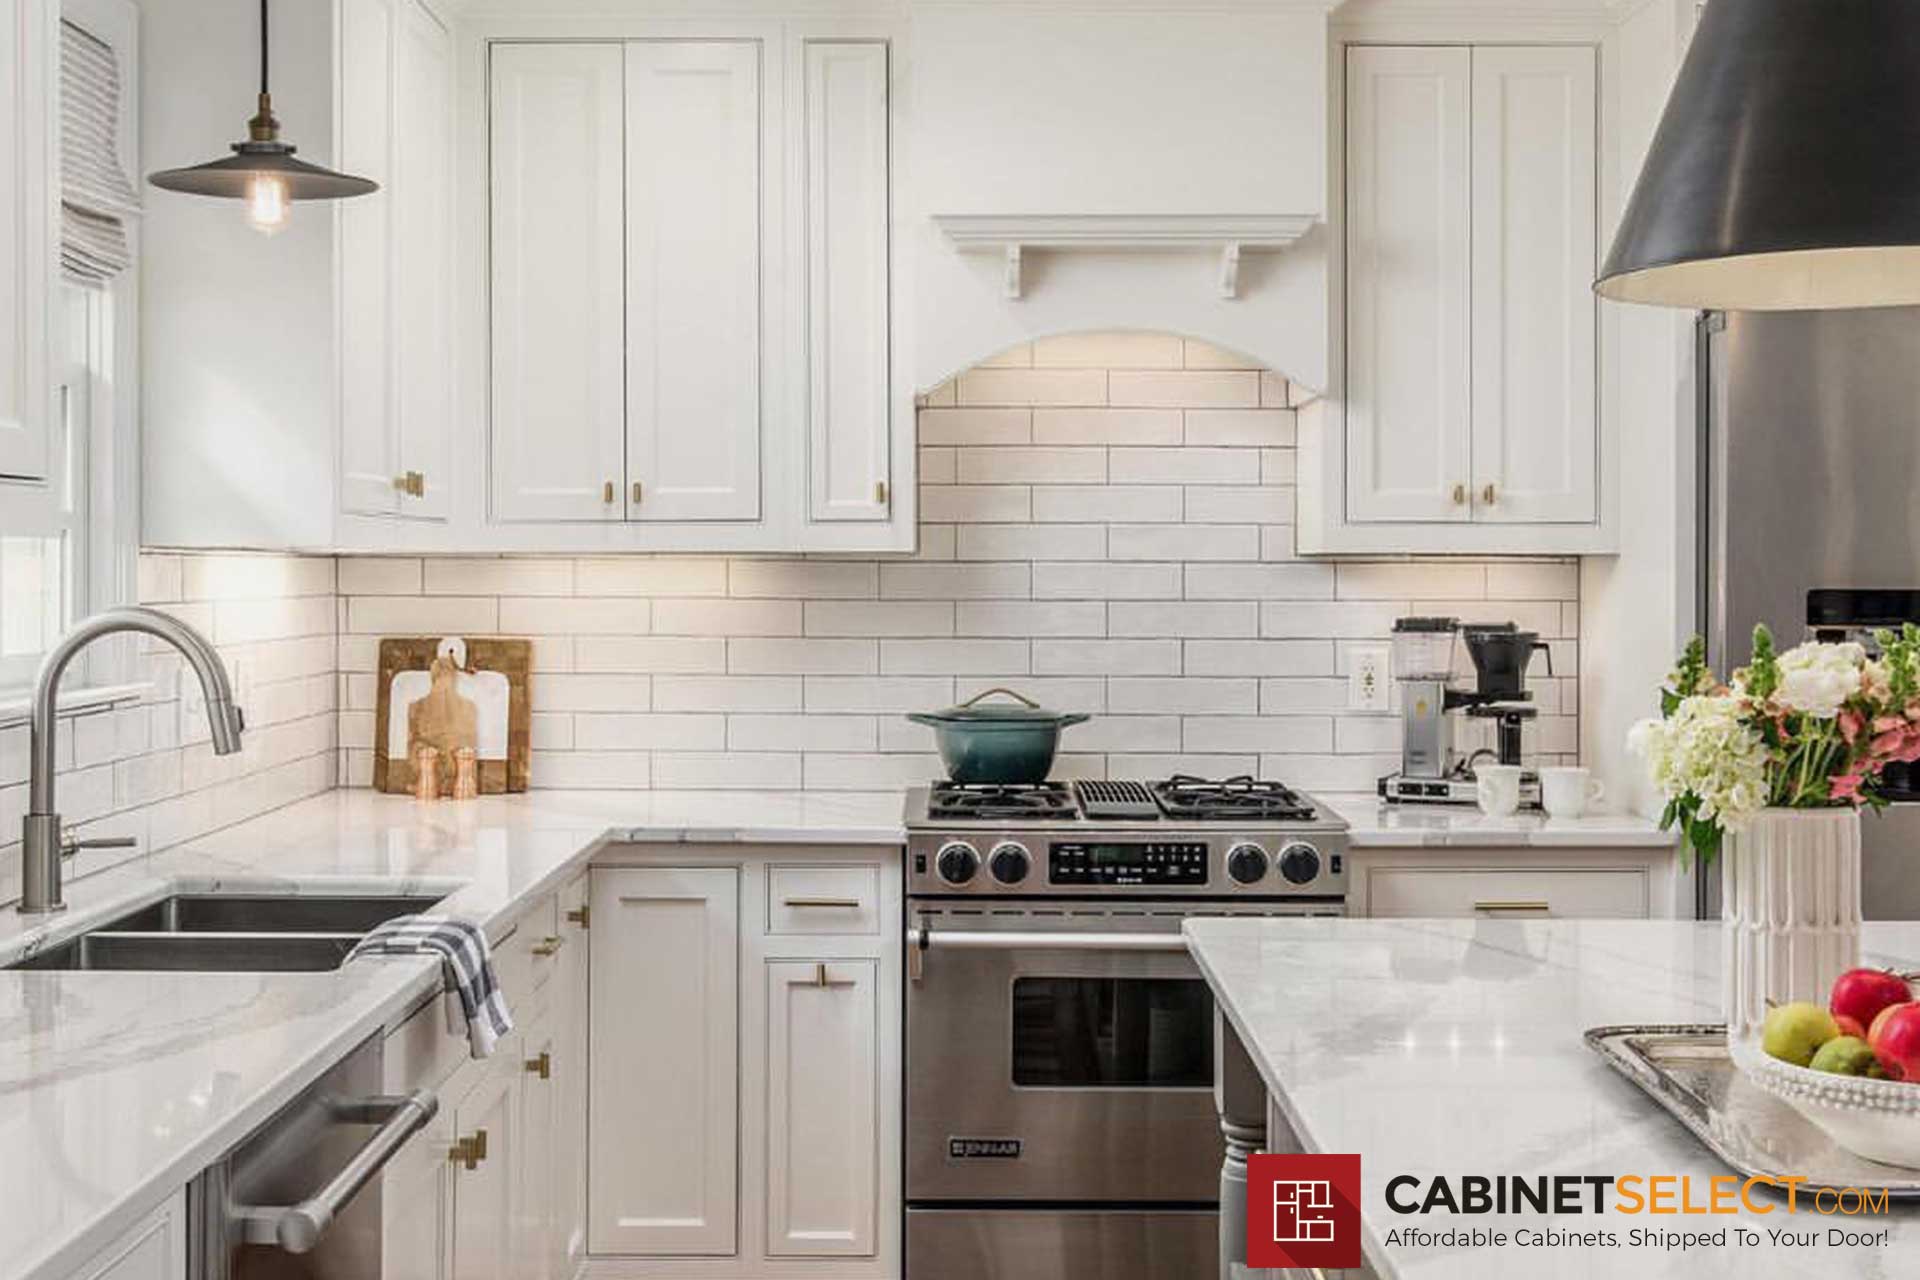 Best Kitchen Remodeling Tips | CabinetSelect.com